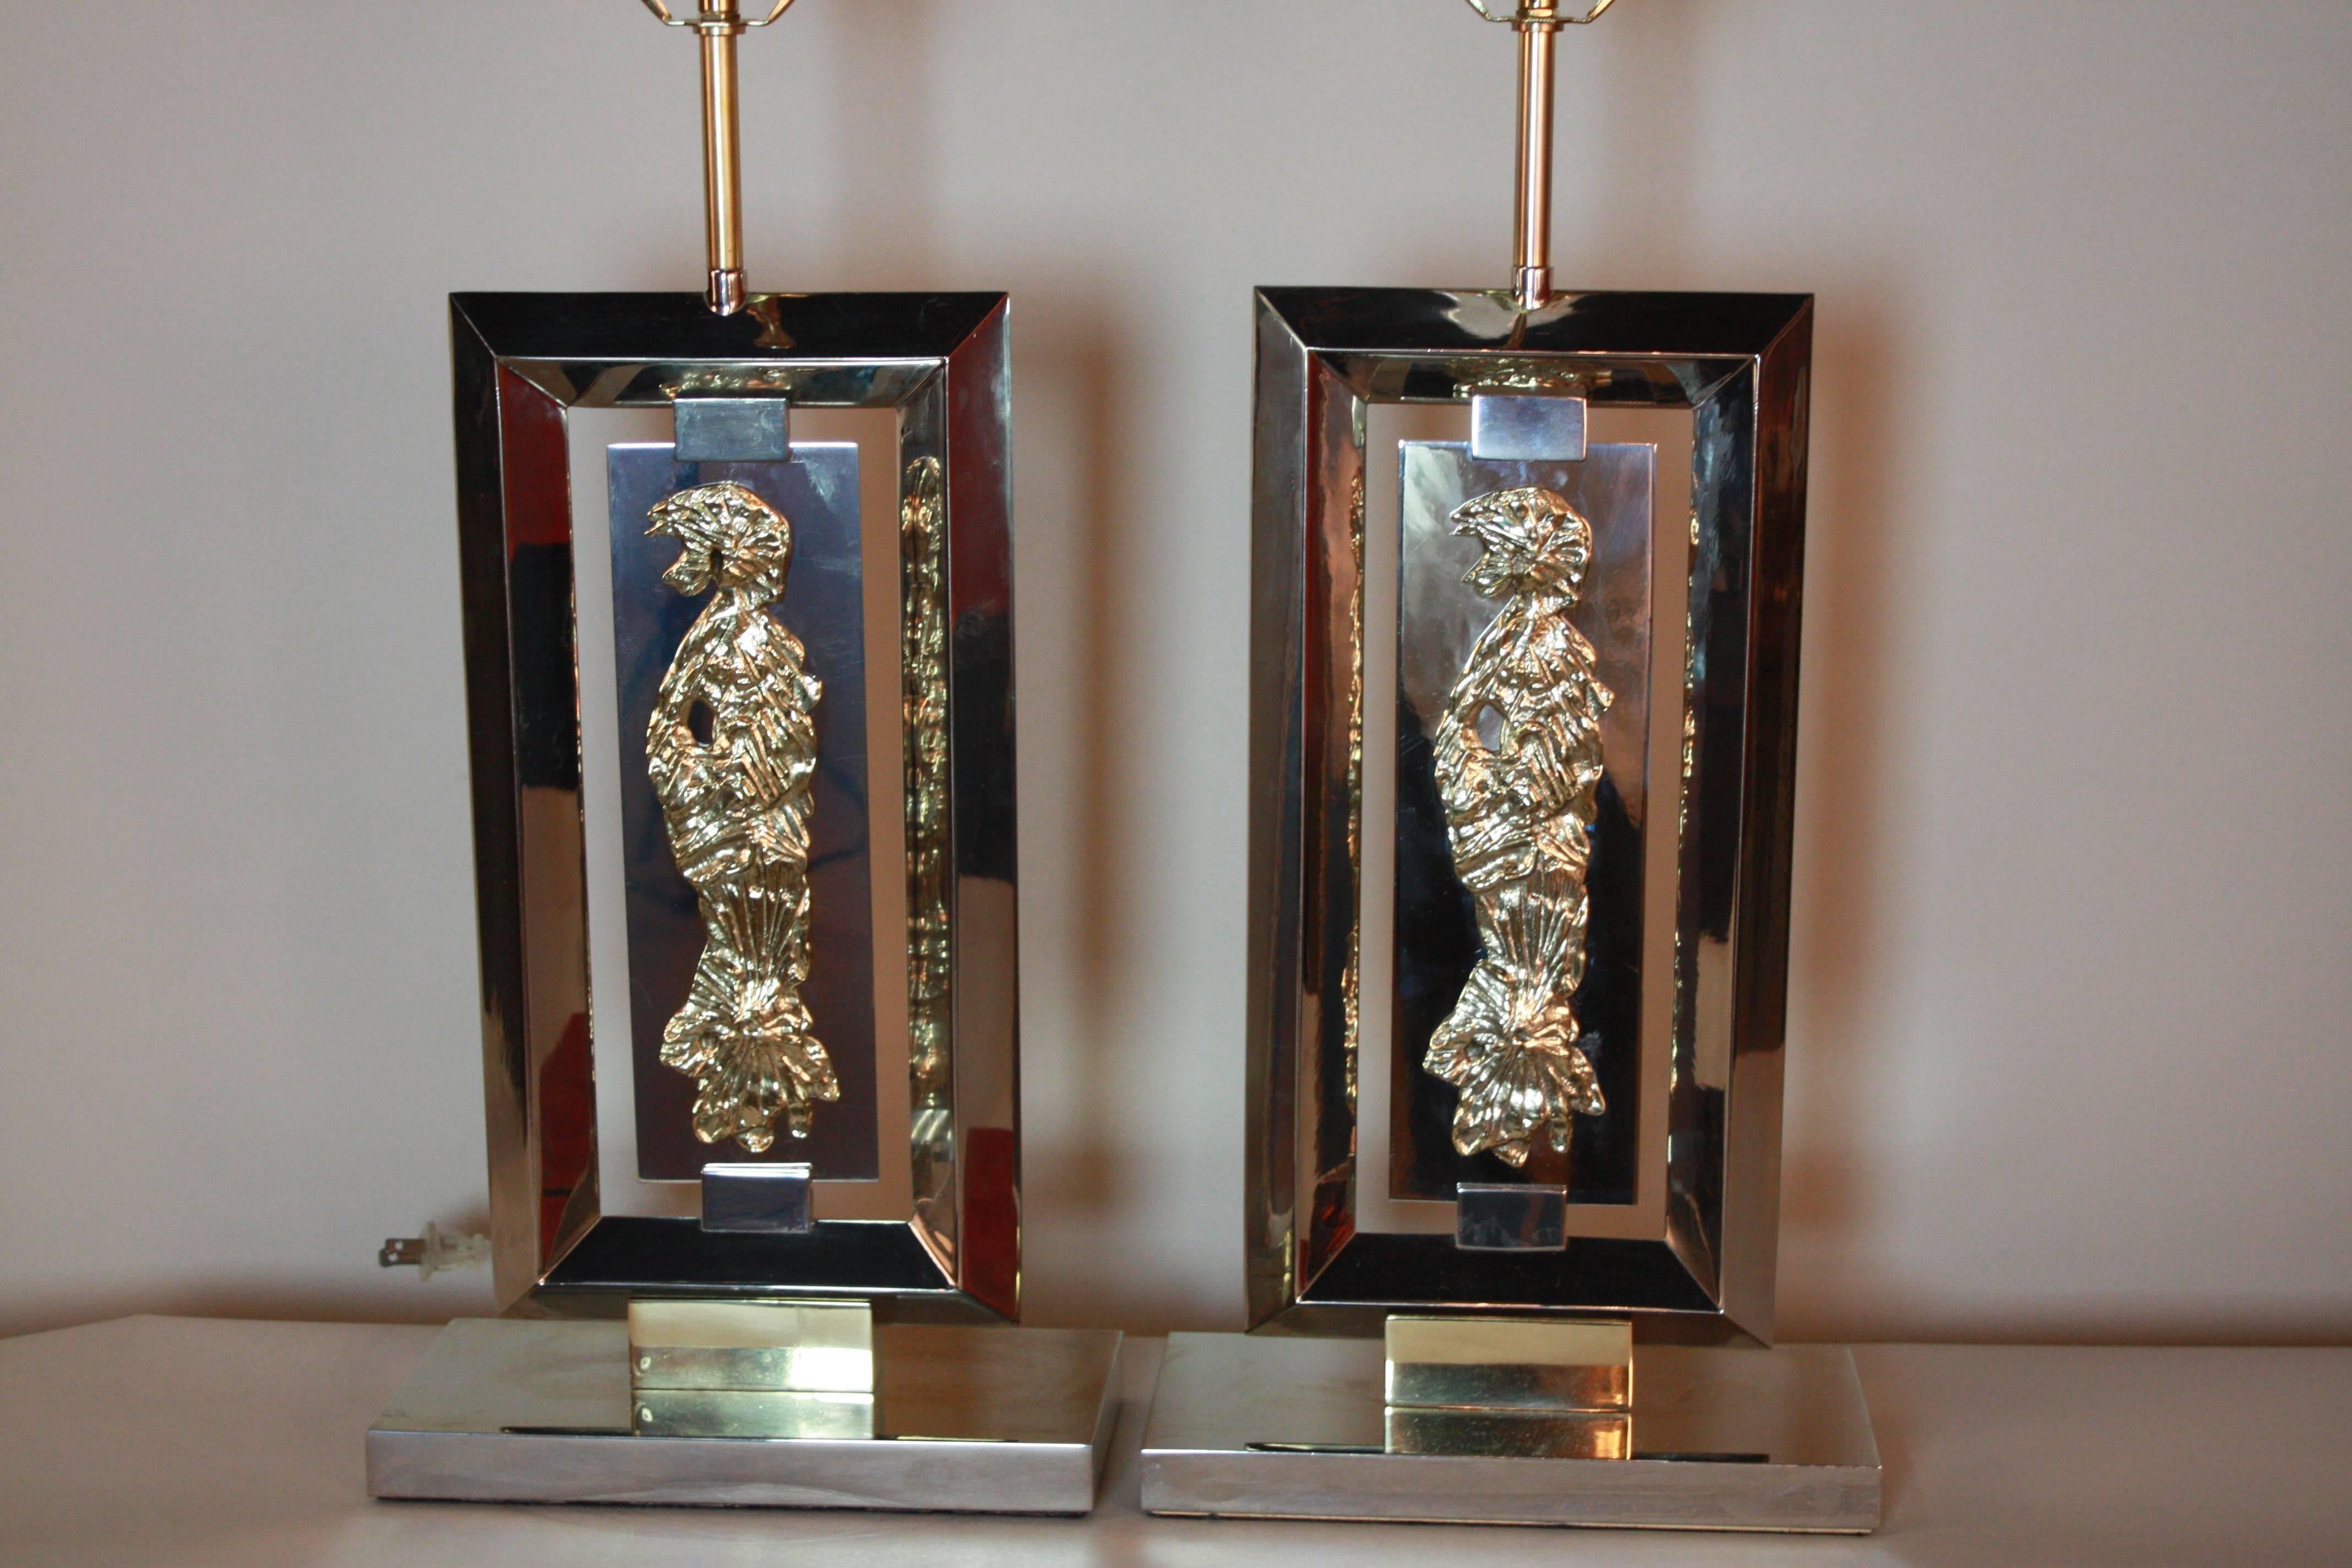 Pair of modern nickel on bronze table lamps with fantastic bronze sculpture of woman over a nickel plaque in the center of these oblong lamps.
Total height of the is 30